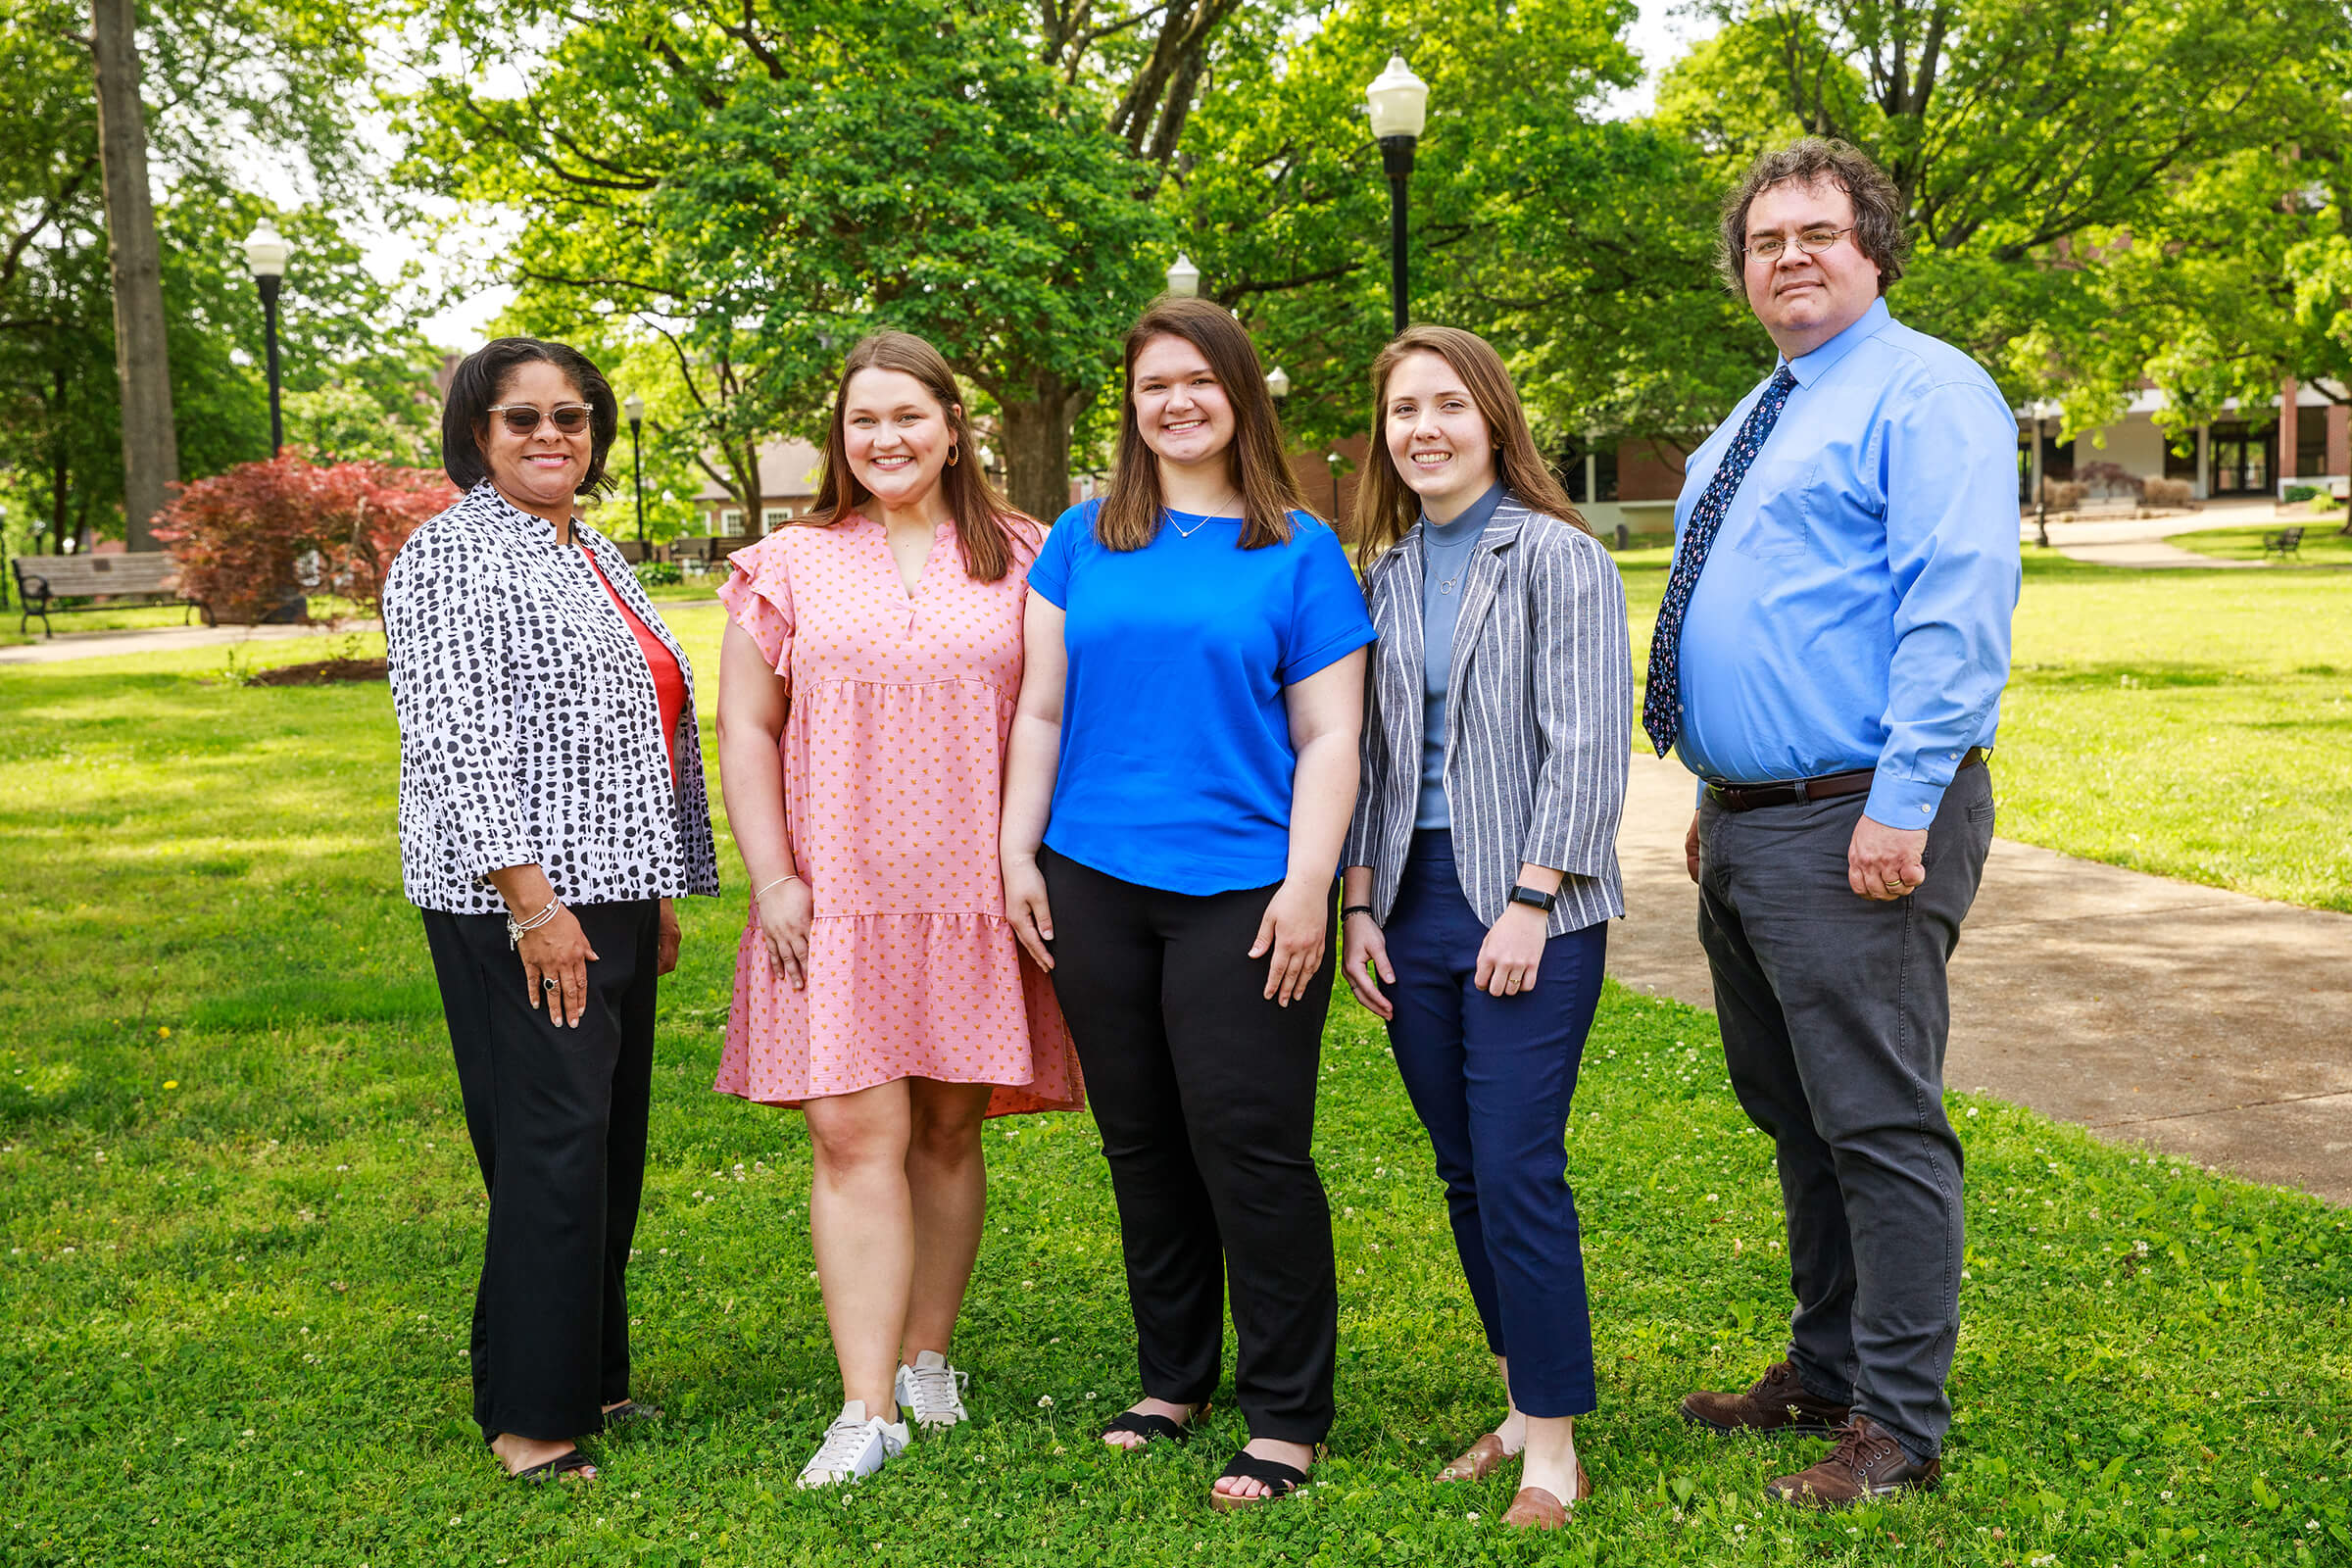 Ms. Petra McPhearson (far left) and Dr. Steve Elliott (far right), welcome three new Scholars, (left to right) Ms. Abby Webb, Ms. Kaitlyn Marrs, and Ms. Taylor Overcast.